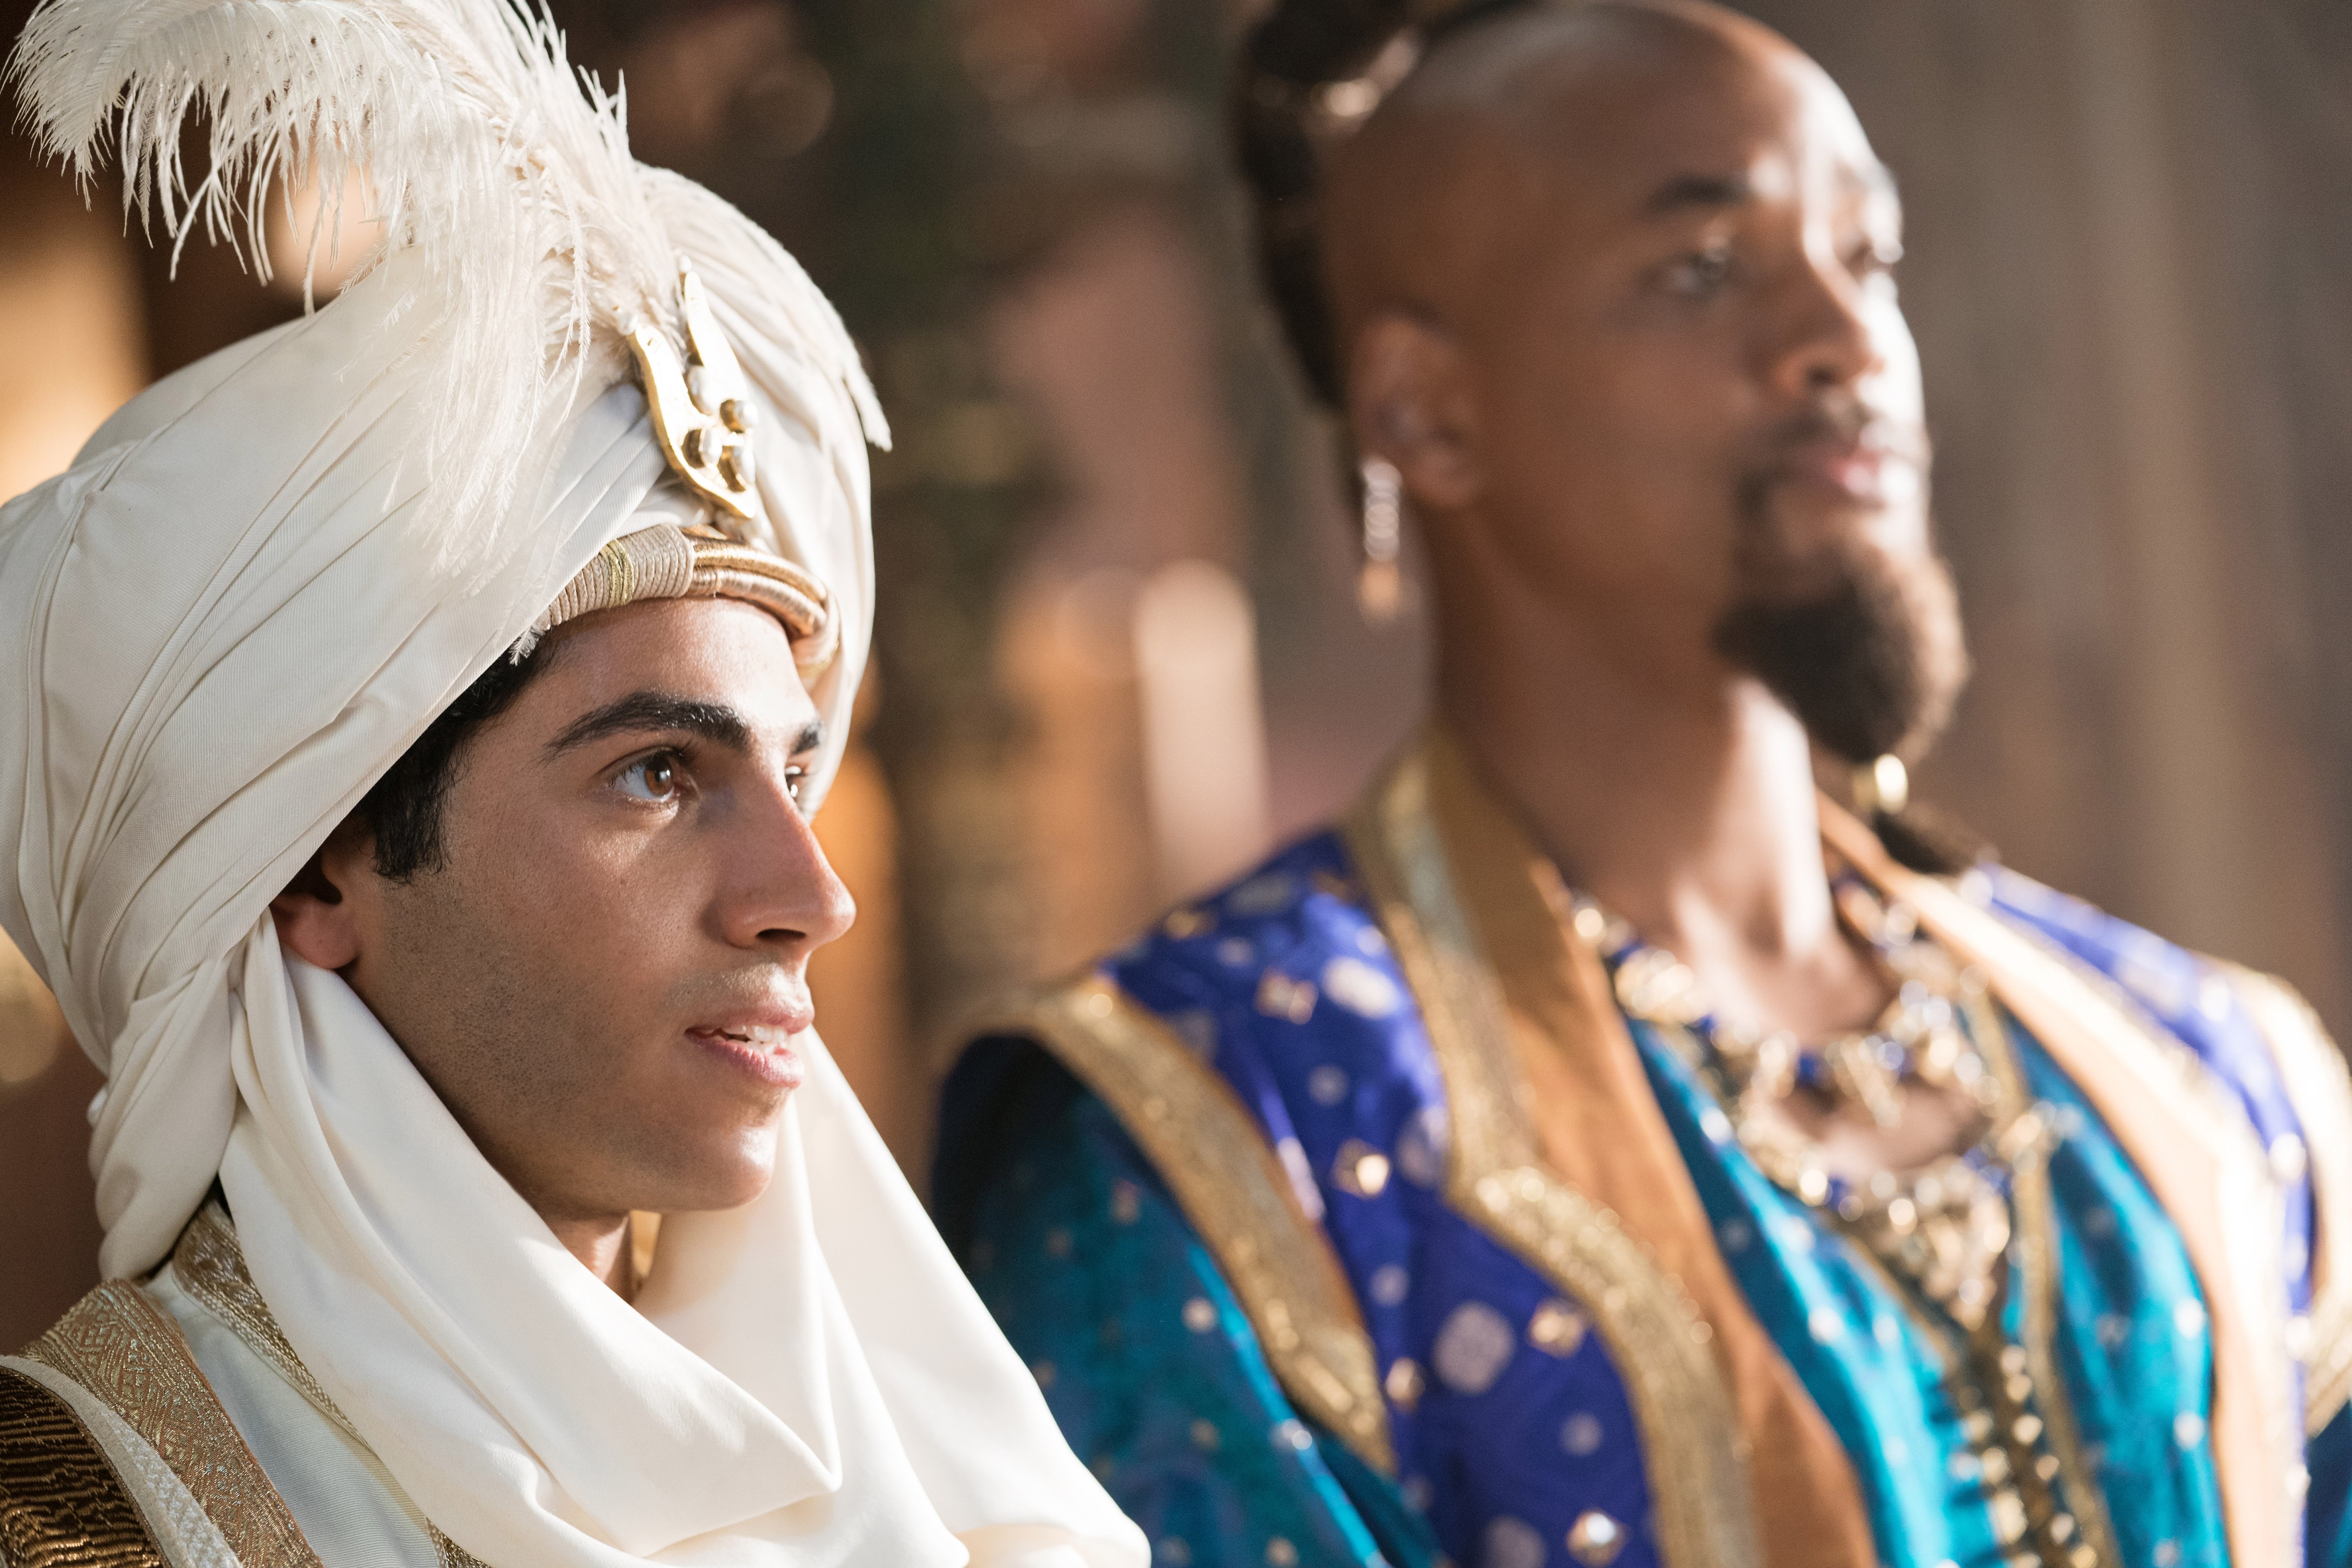 Mena Massoud is Aladdin and Will Smith is Genie in Disney’s live-action Aladdin, directed by Guy Ritchie. (Photo Credit: Daniel Smith—Disney)